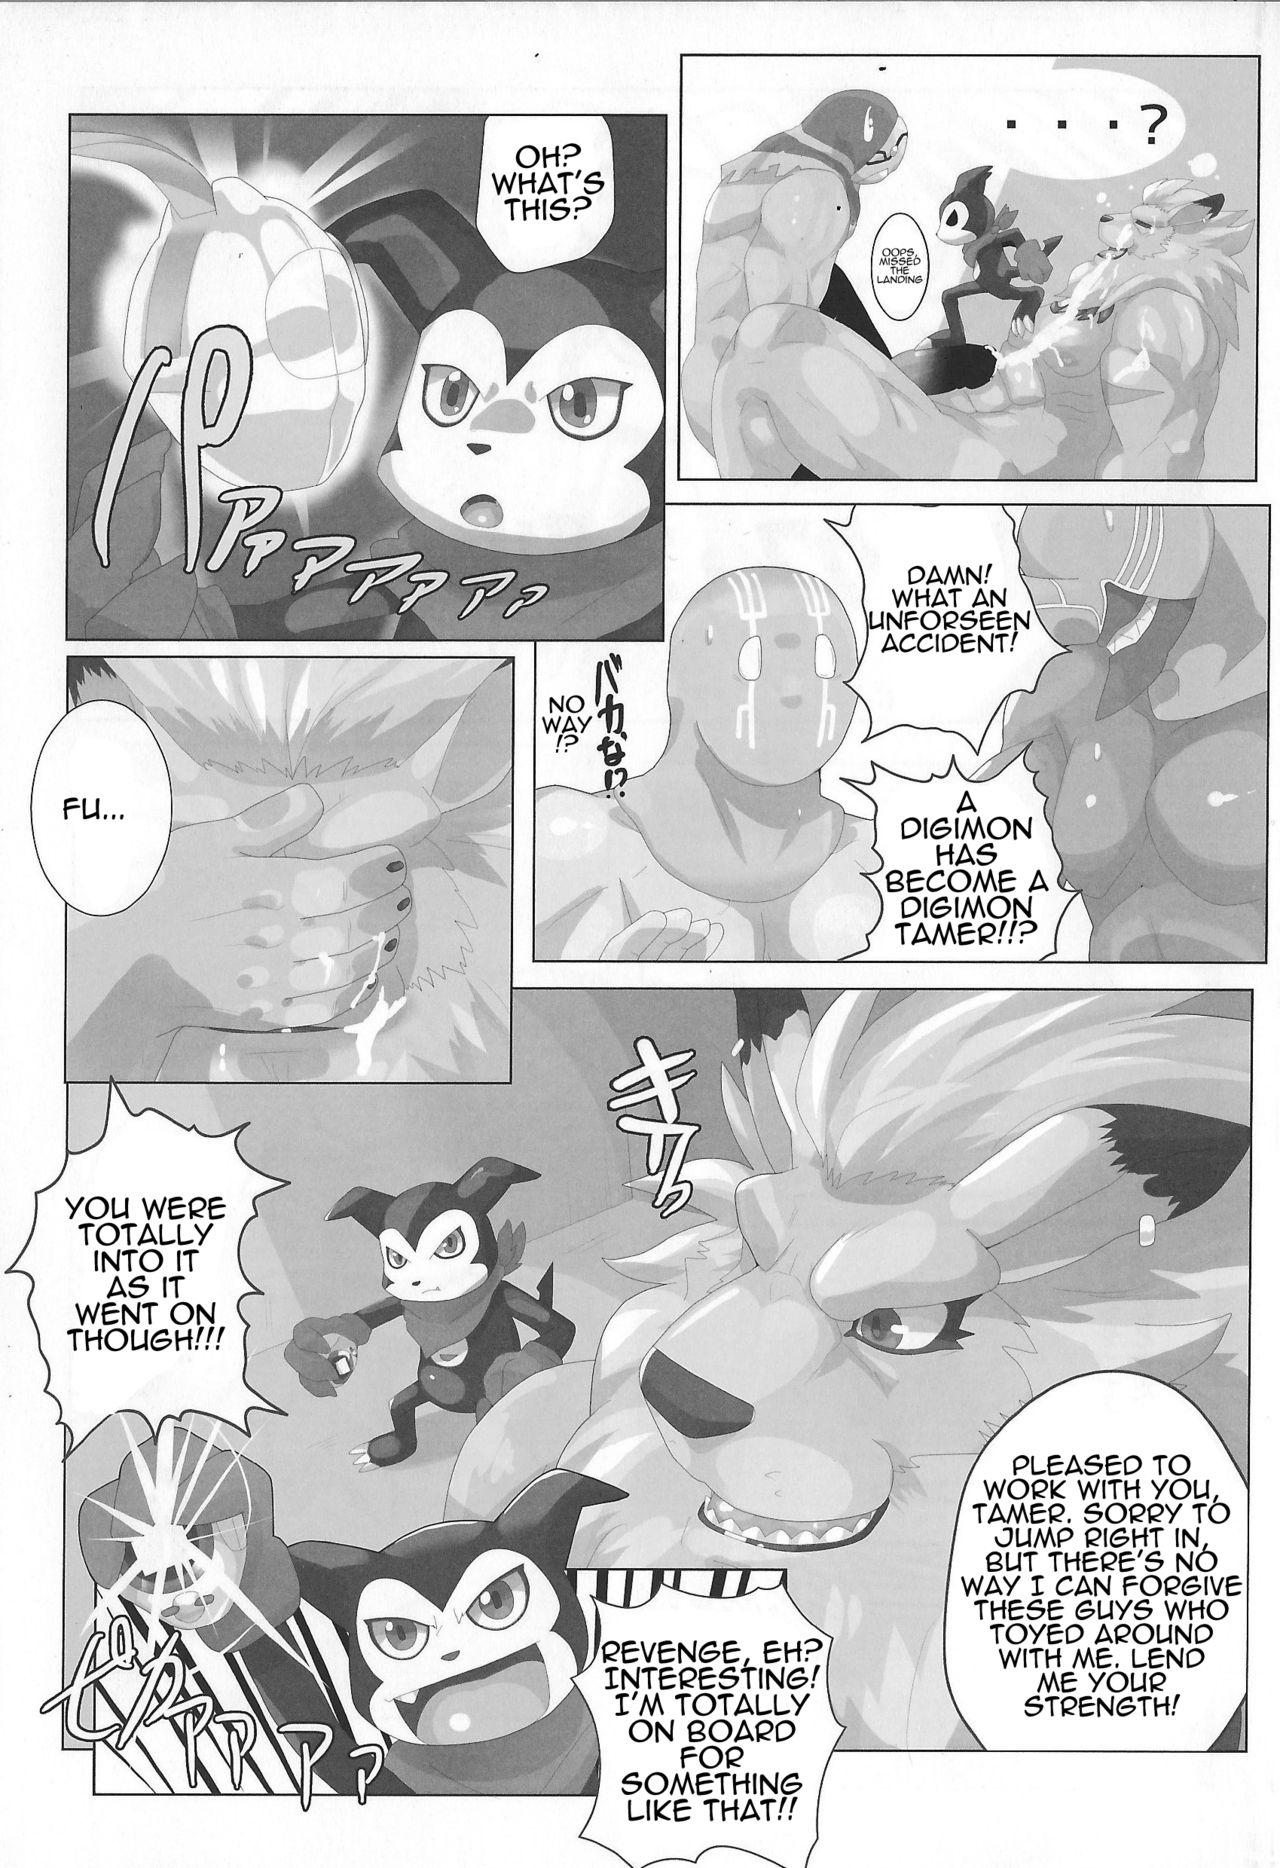 [Debirobu] For the Lion-Man Type Electric Life Form to Overturn Fate - Leomon Doujin [ENG] 21